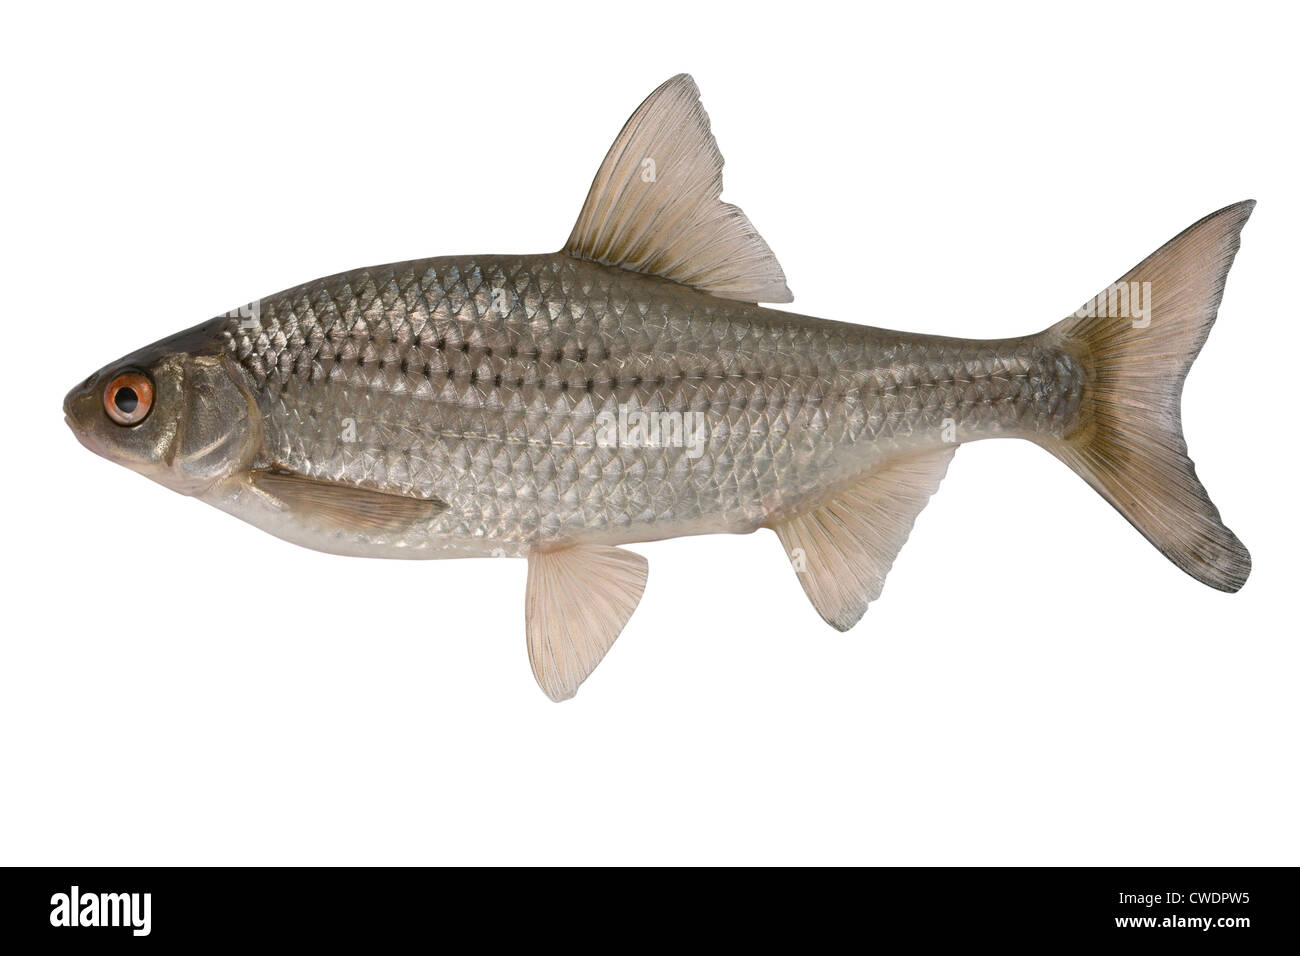 Vobla most widespread fish in territory of Asia and Europe. Stock Photo